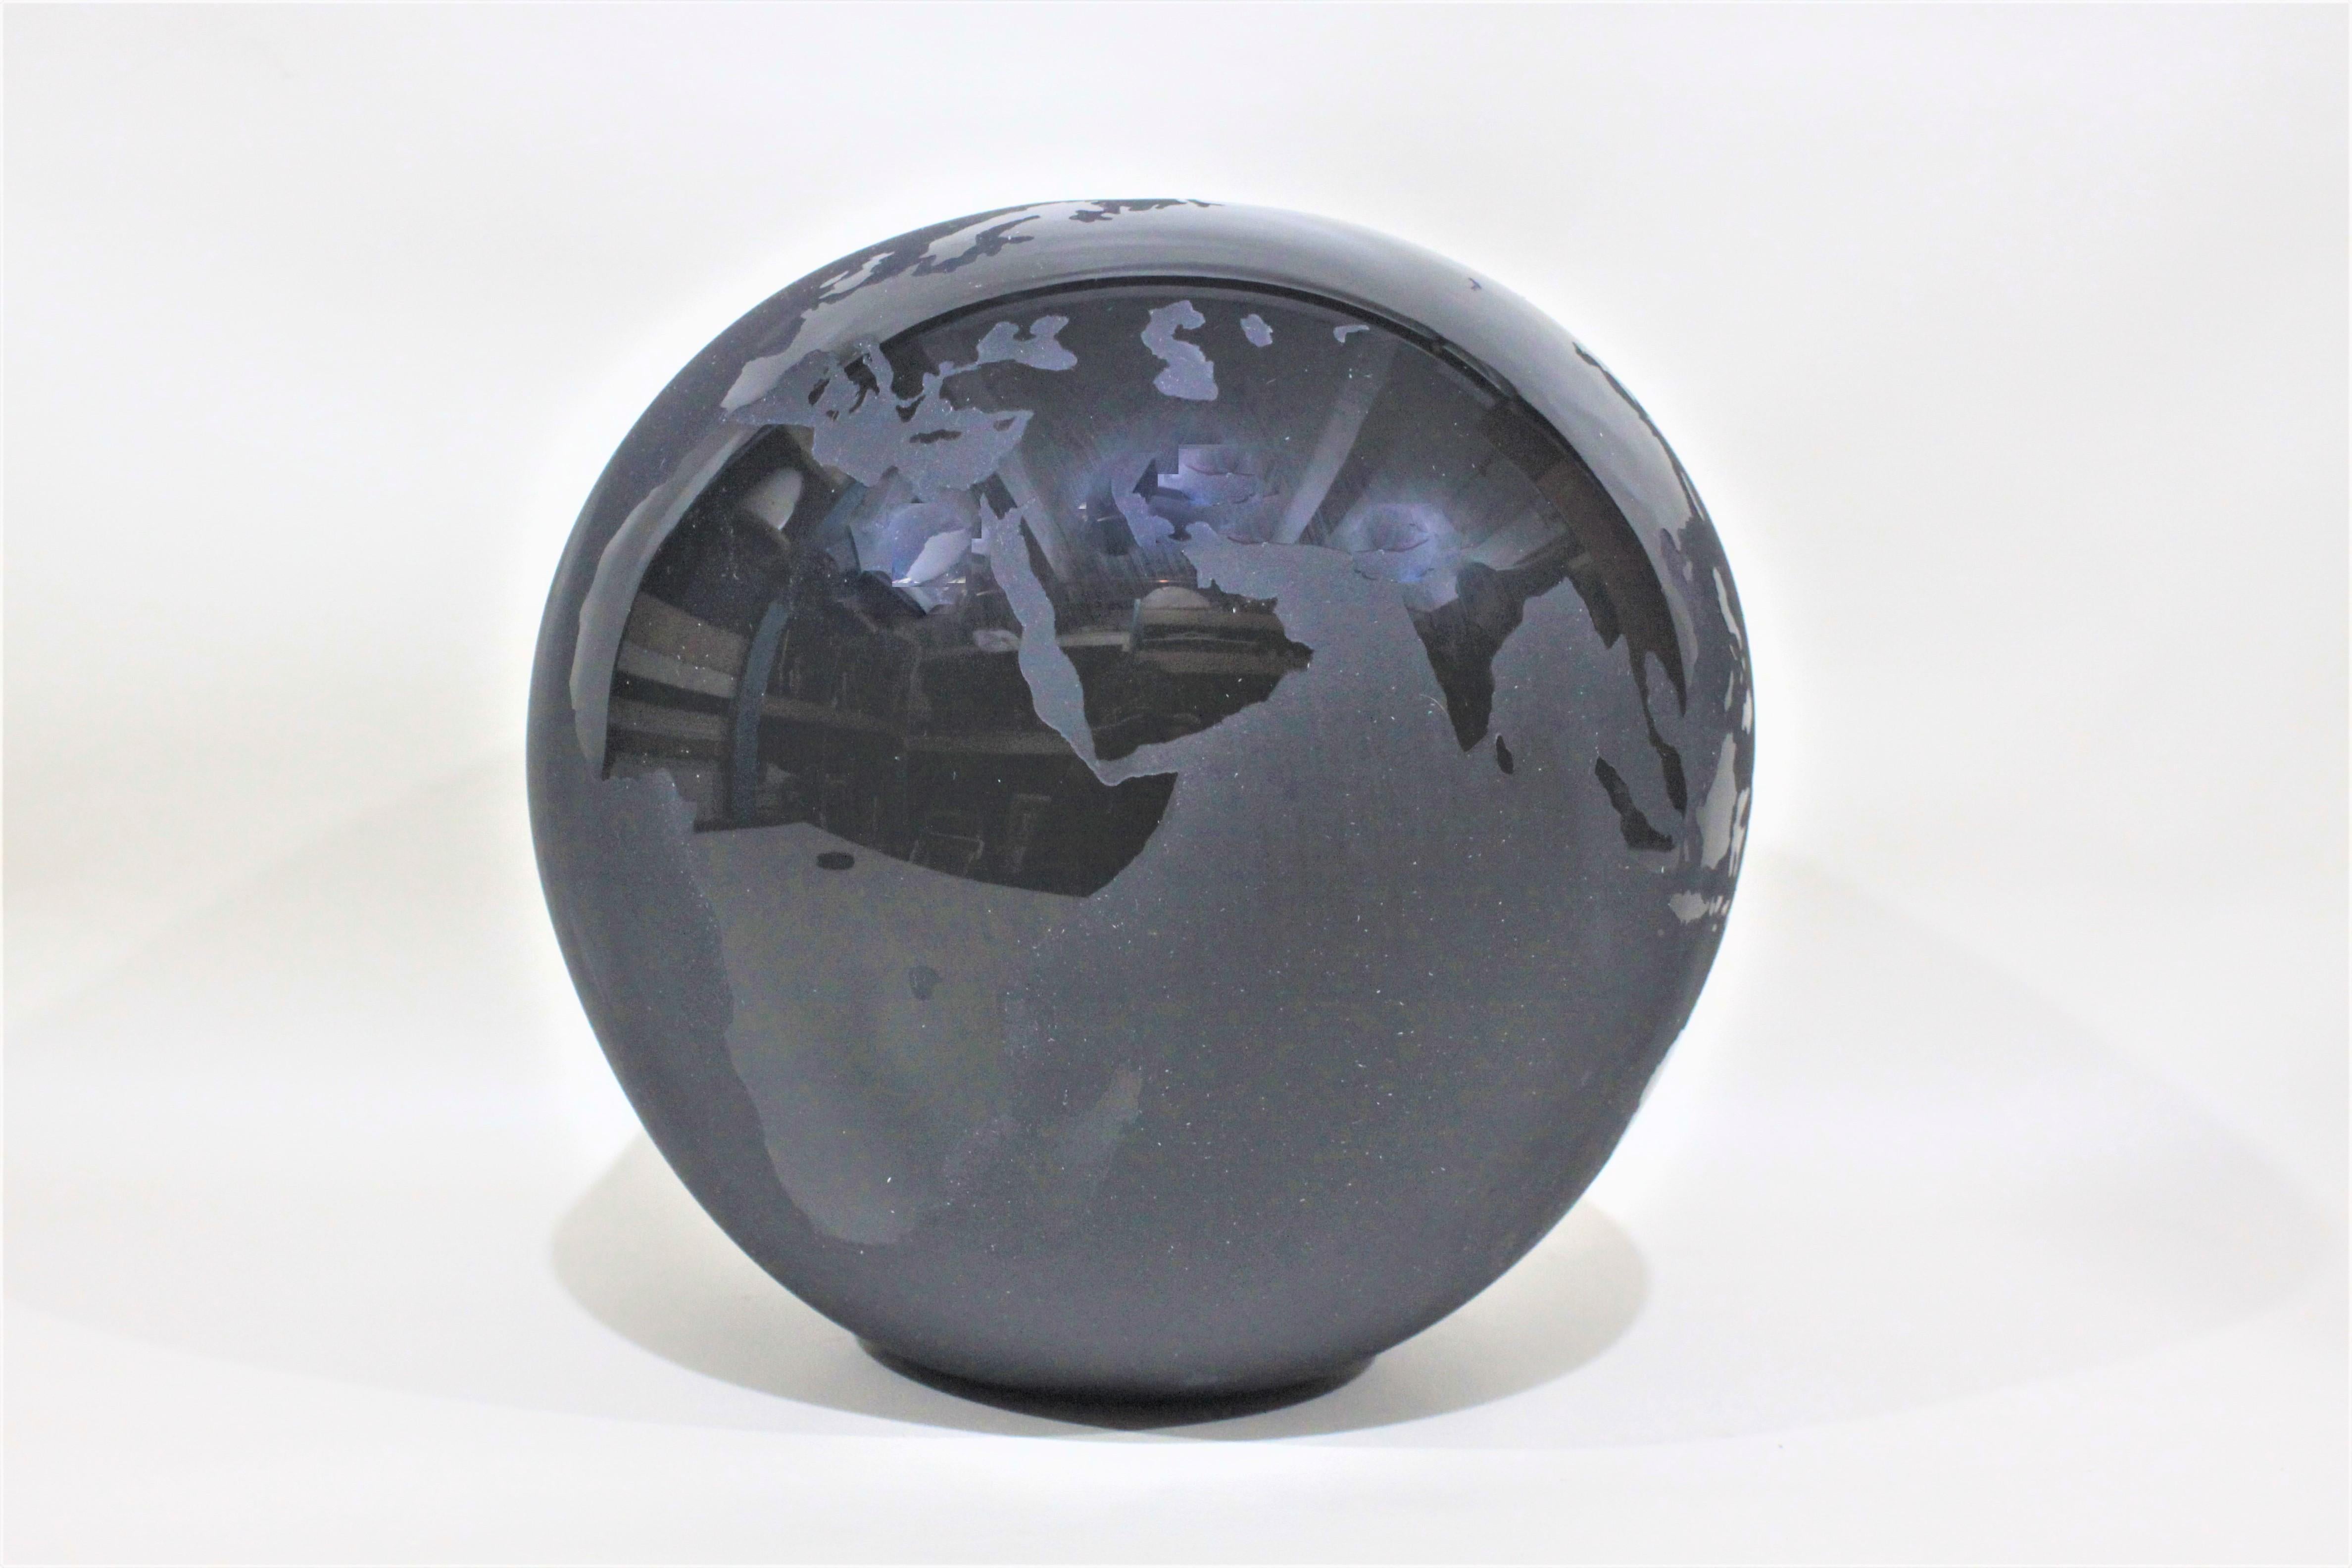 This contemporary artist signed black glass vase was likely done between 1980-1990 and depicts a stylized rendering of the world globe. Unfortunately the artist's signature is illegible. This black art glass vase is etched resulting in a contrast of